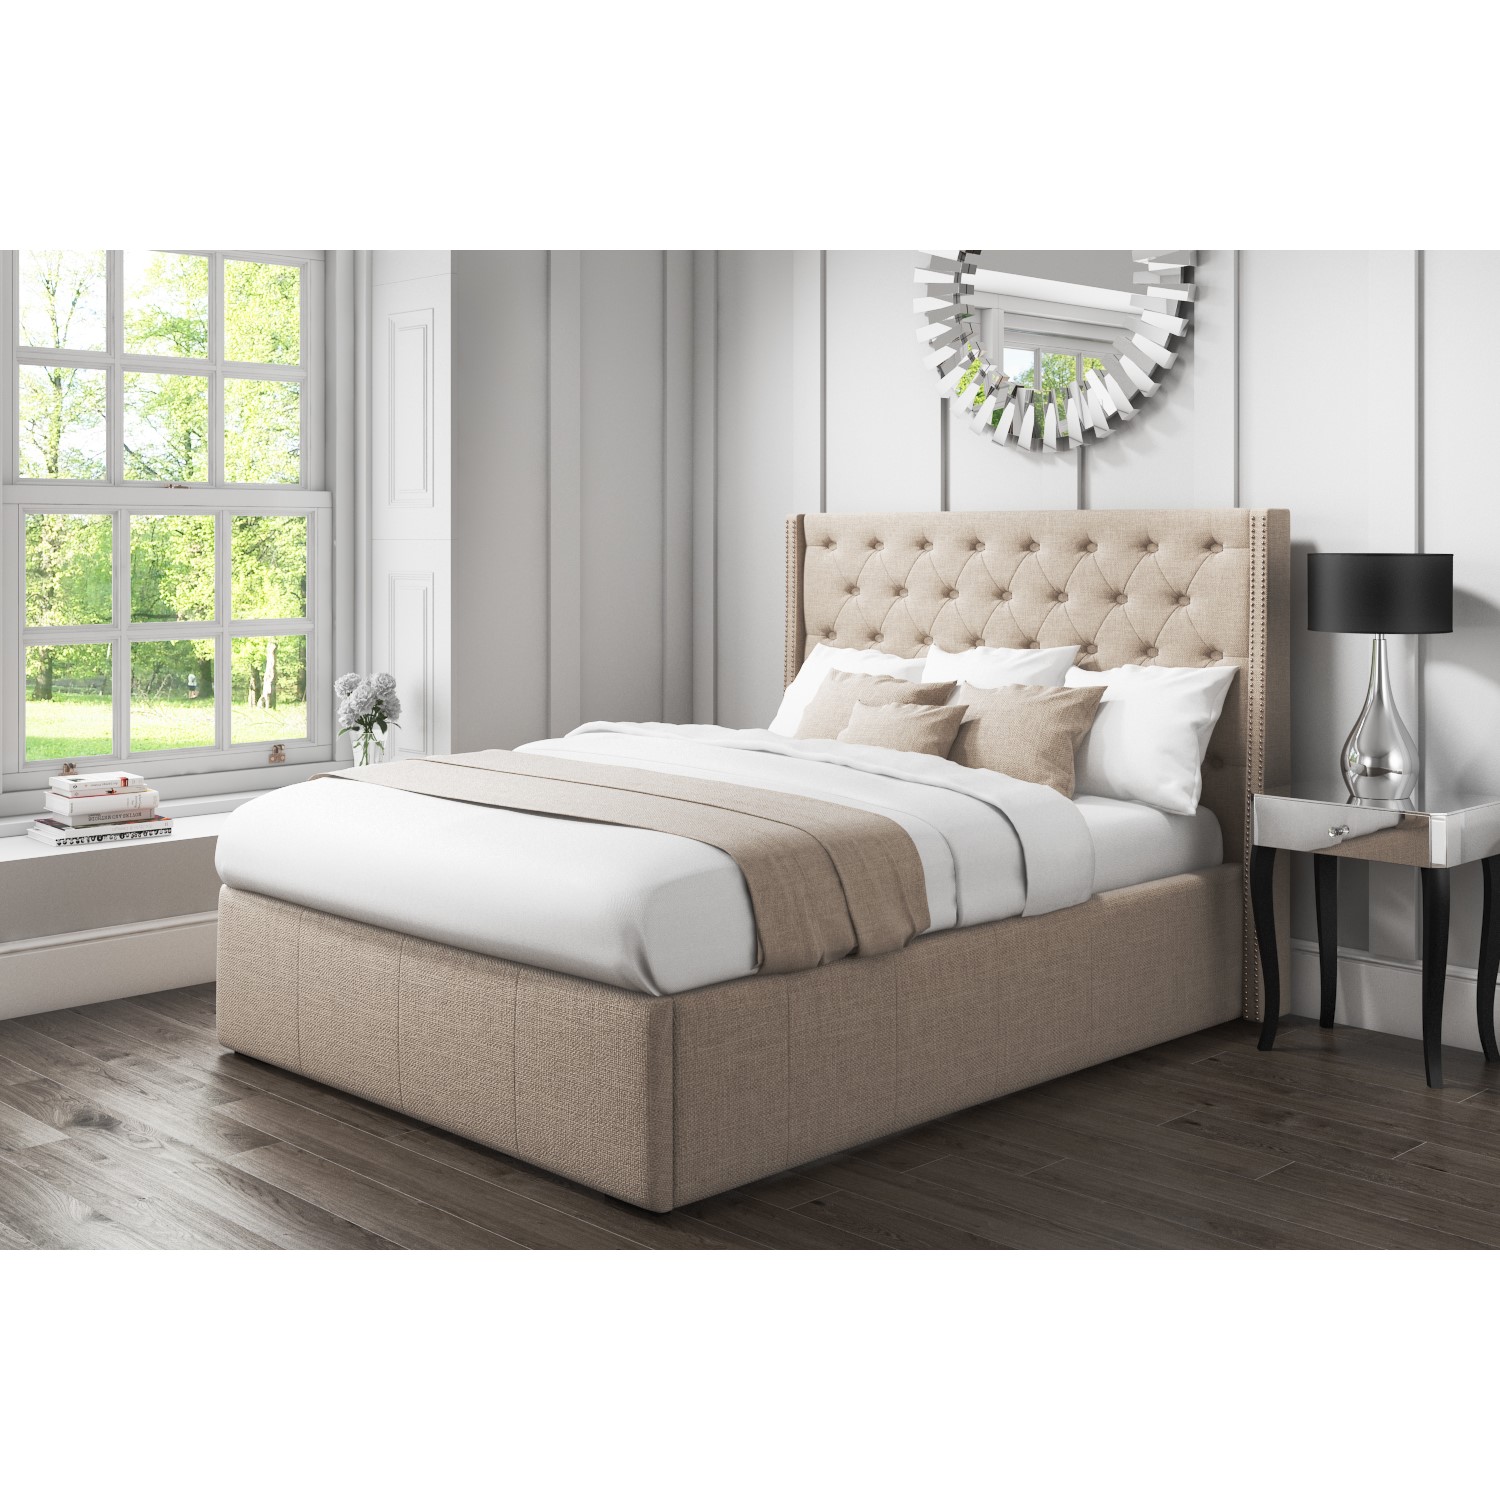 Safina King Size Ottoman Bed with Stud Detailing in Beige 